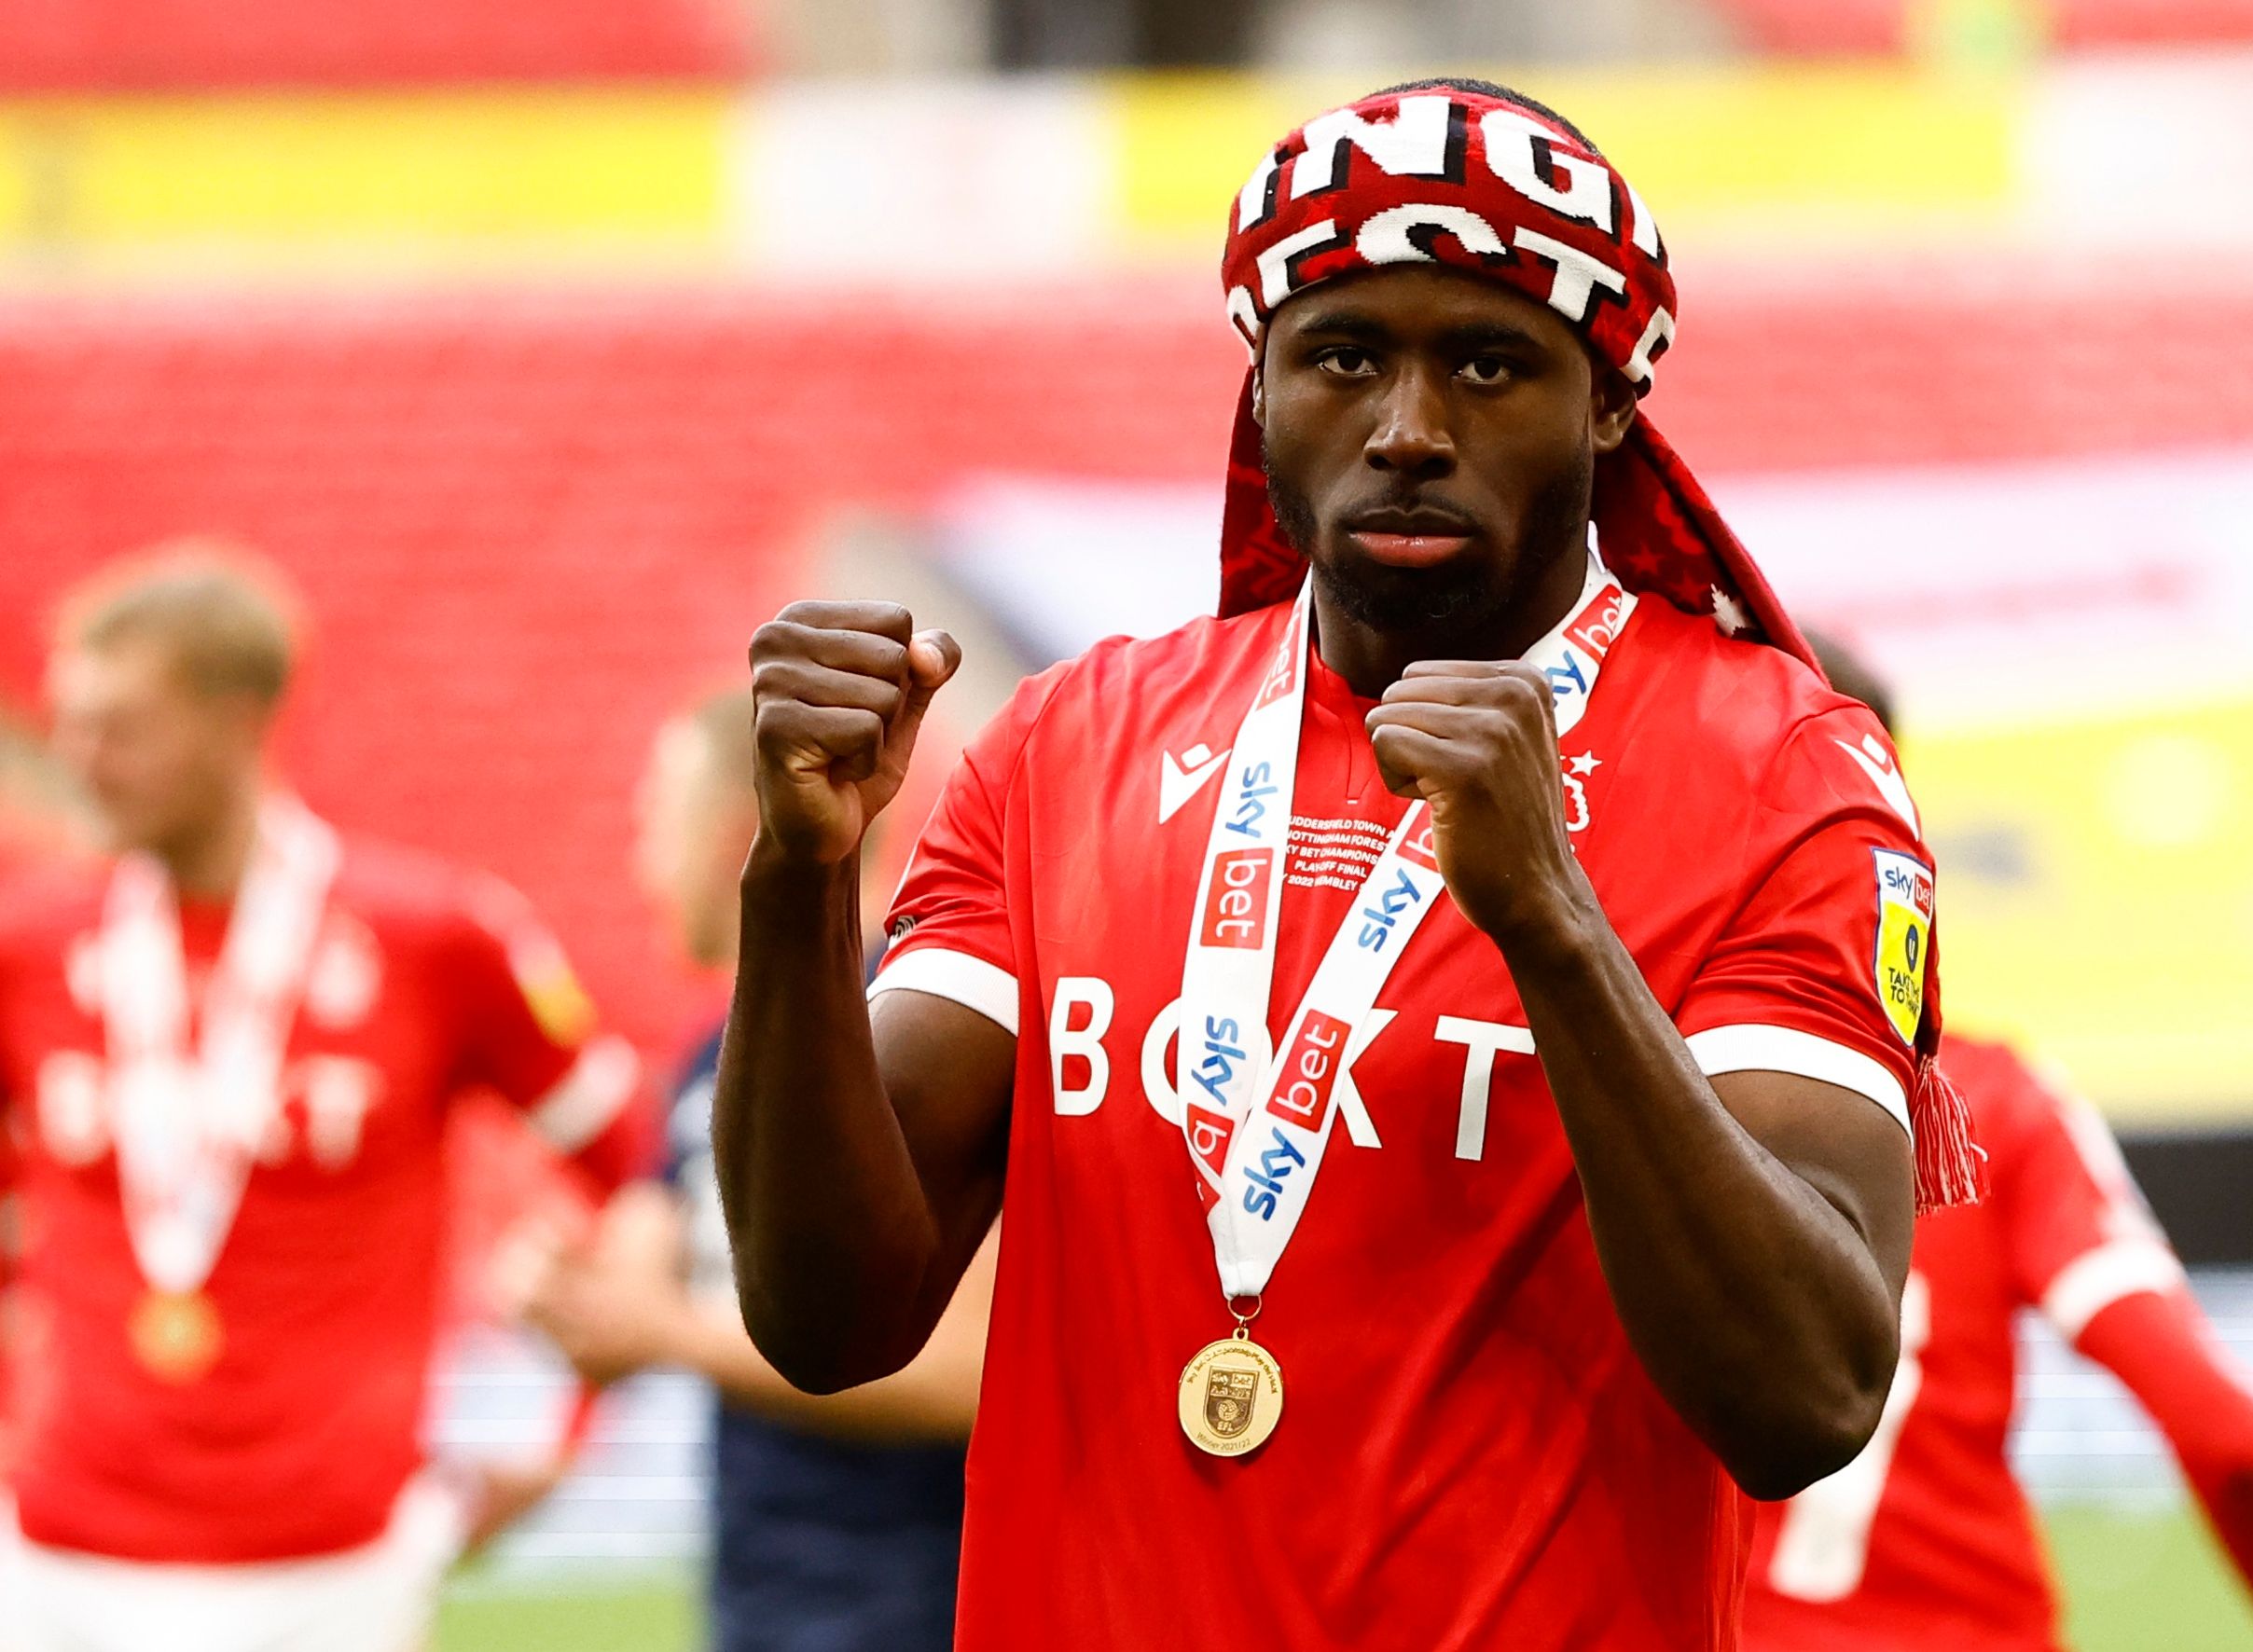 Soccer Football - Championship Play-Off Final - Huddersfield Town v Nottingham Forest - Wembley Stadium, London, Britain - May 29, 2022 Nottingham Forest's Keinan Davis celebrates after winning the Championship Play-Off Final Action Images via Reuters/Andrew Boyers